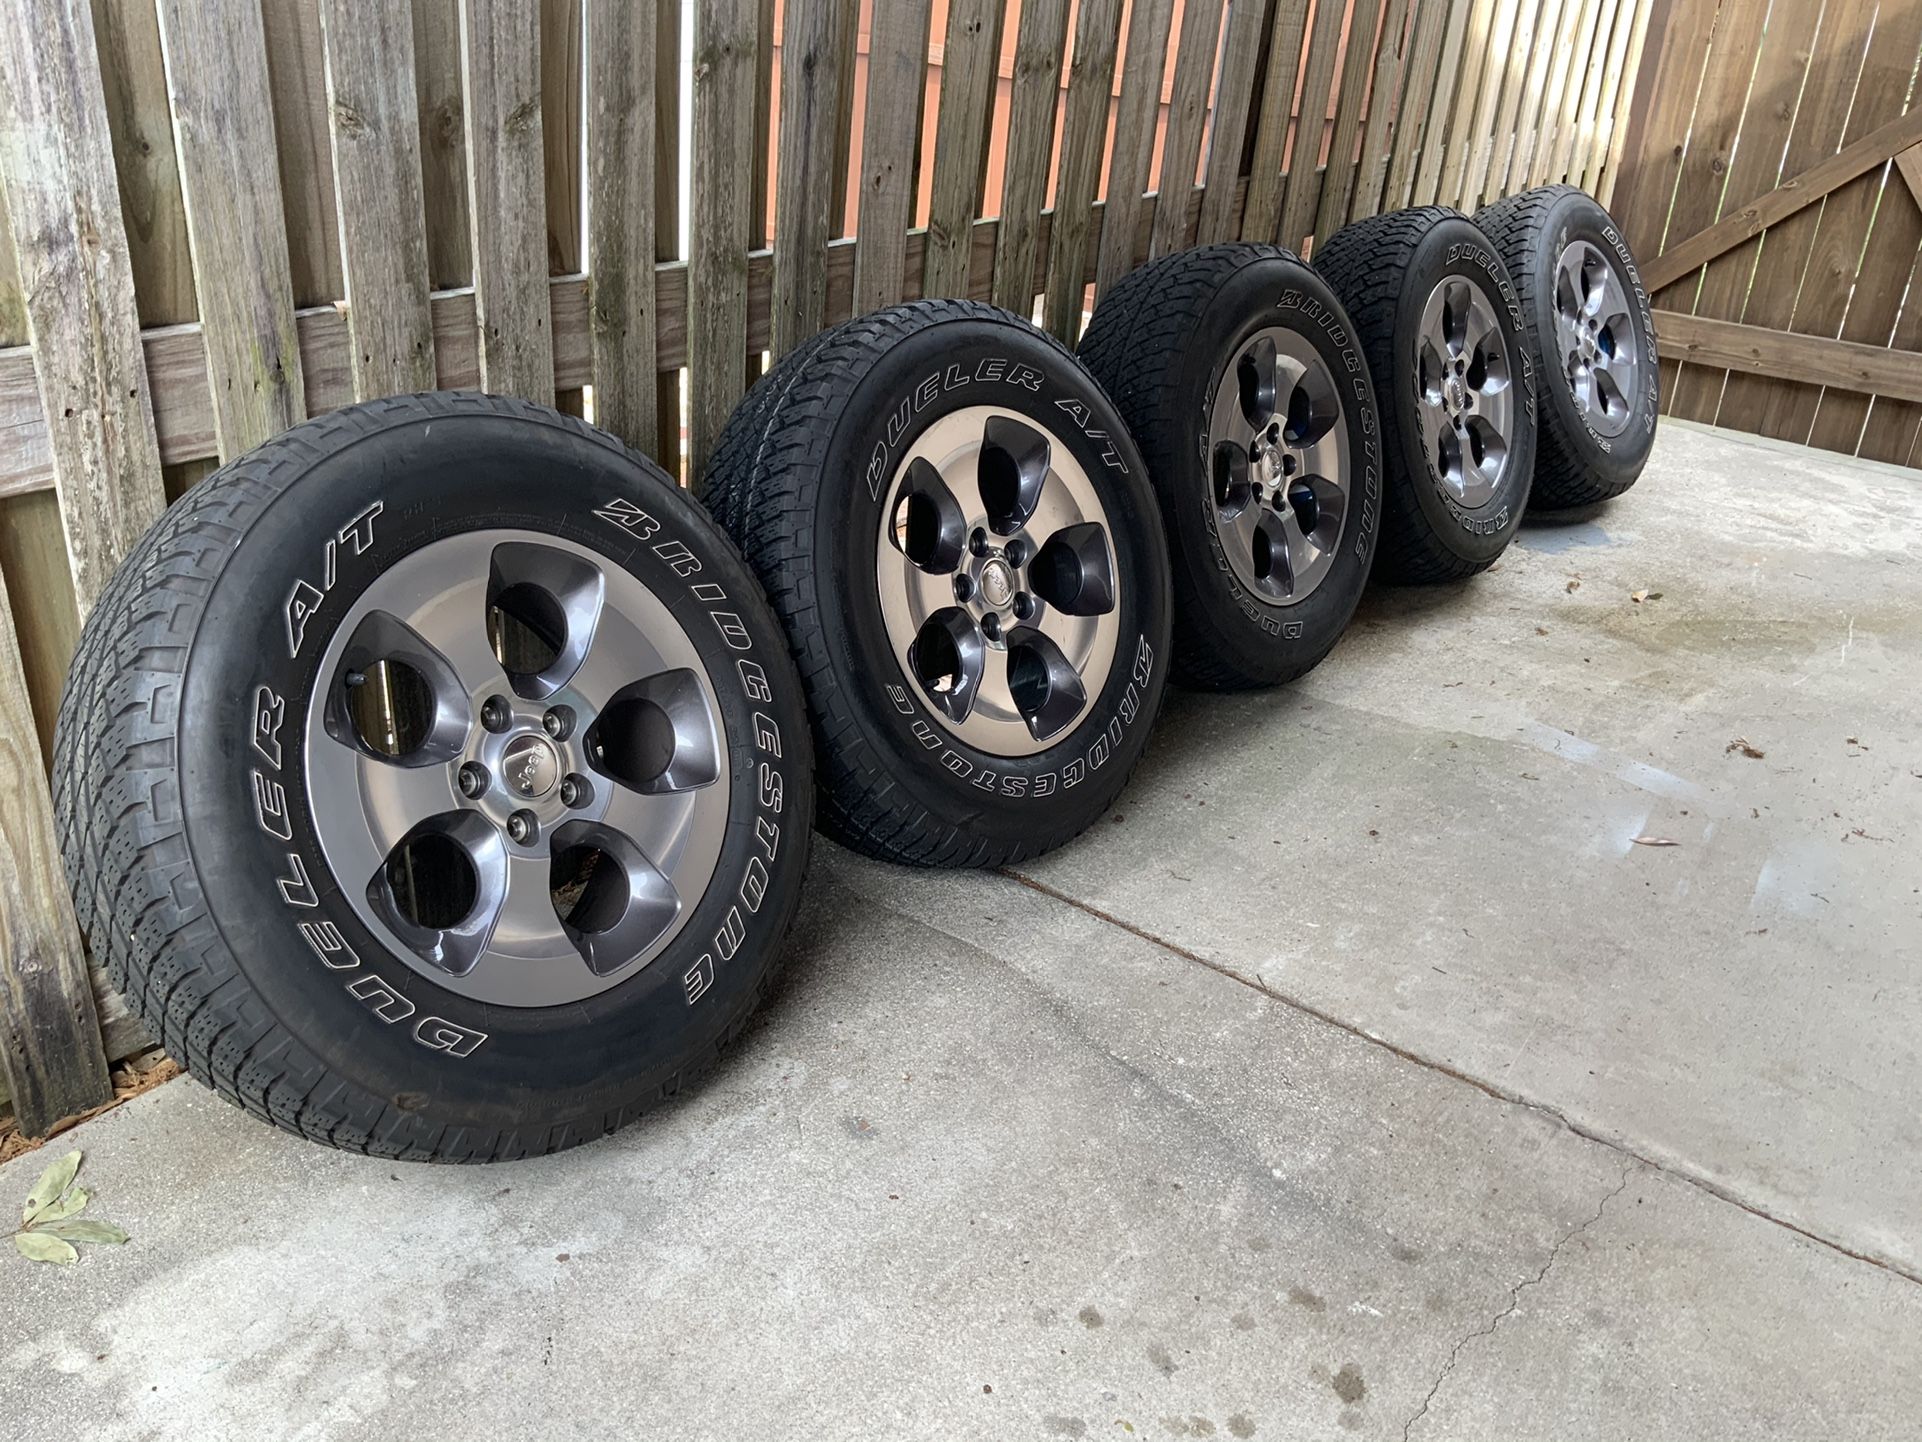 Jeep wheels and tires - set of 5 ——— 18” Super Clean......   $525.00